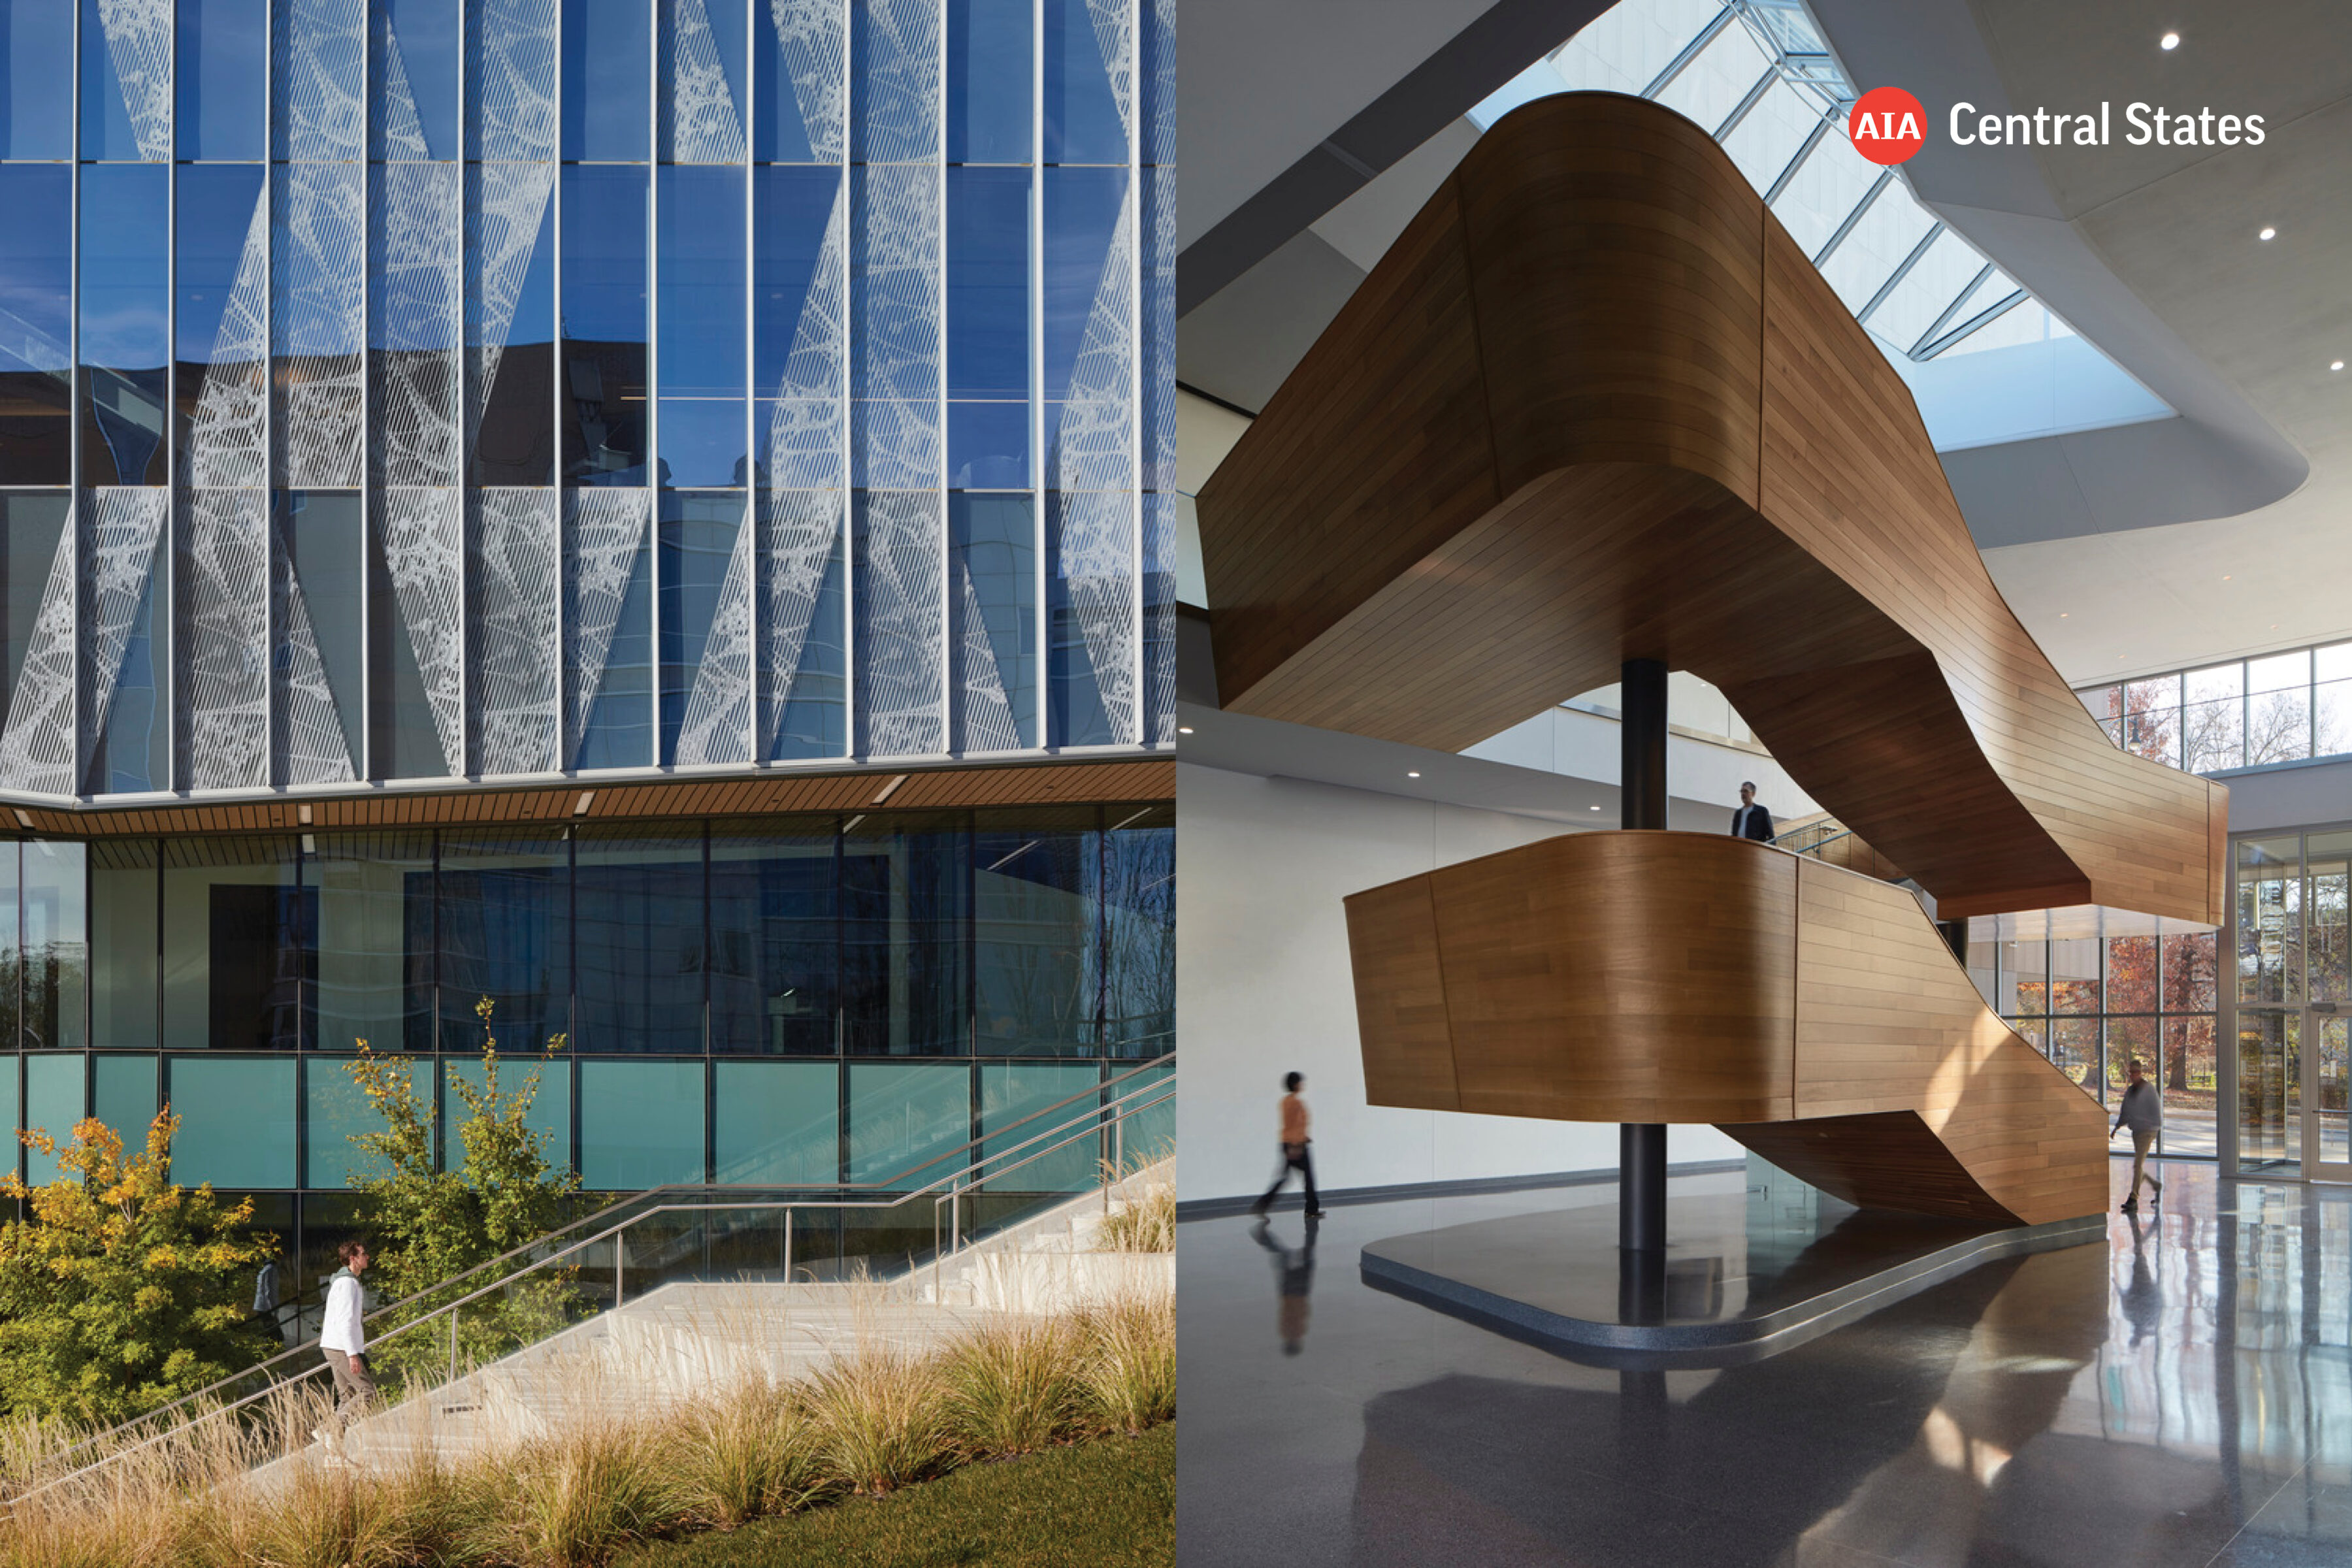 AIA Central States Recognizes the Engagement Center & The State